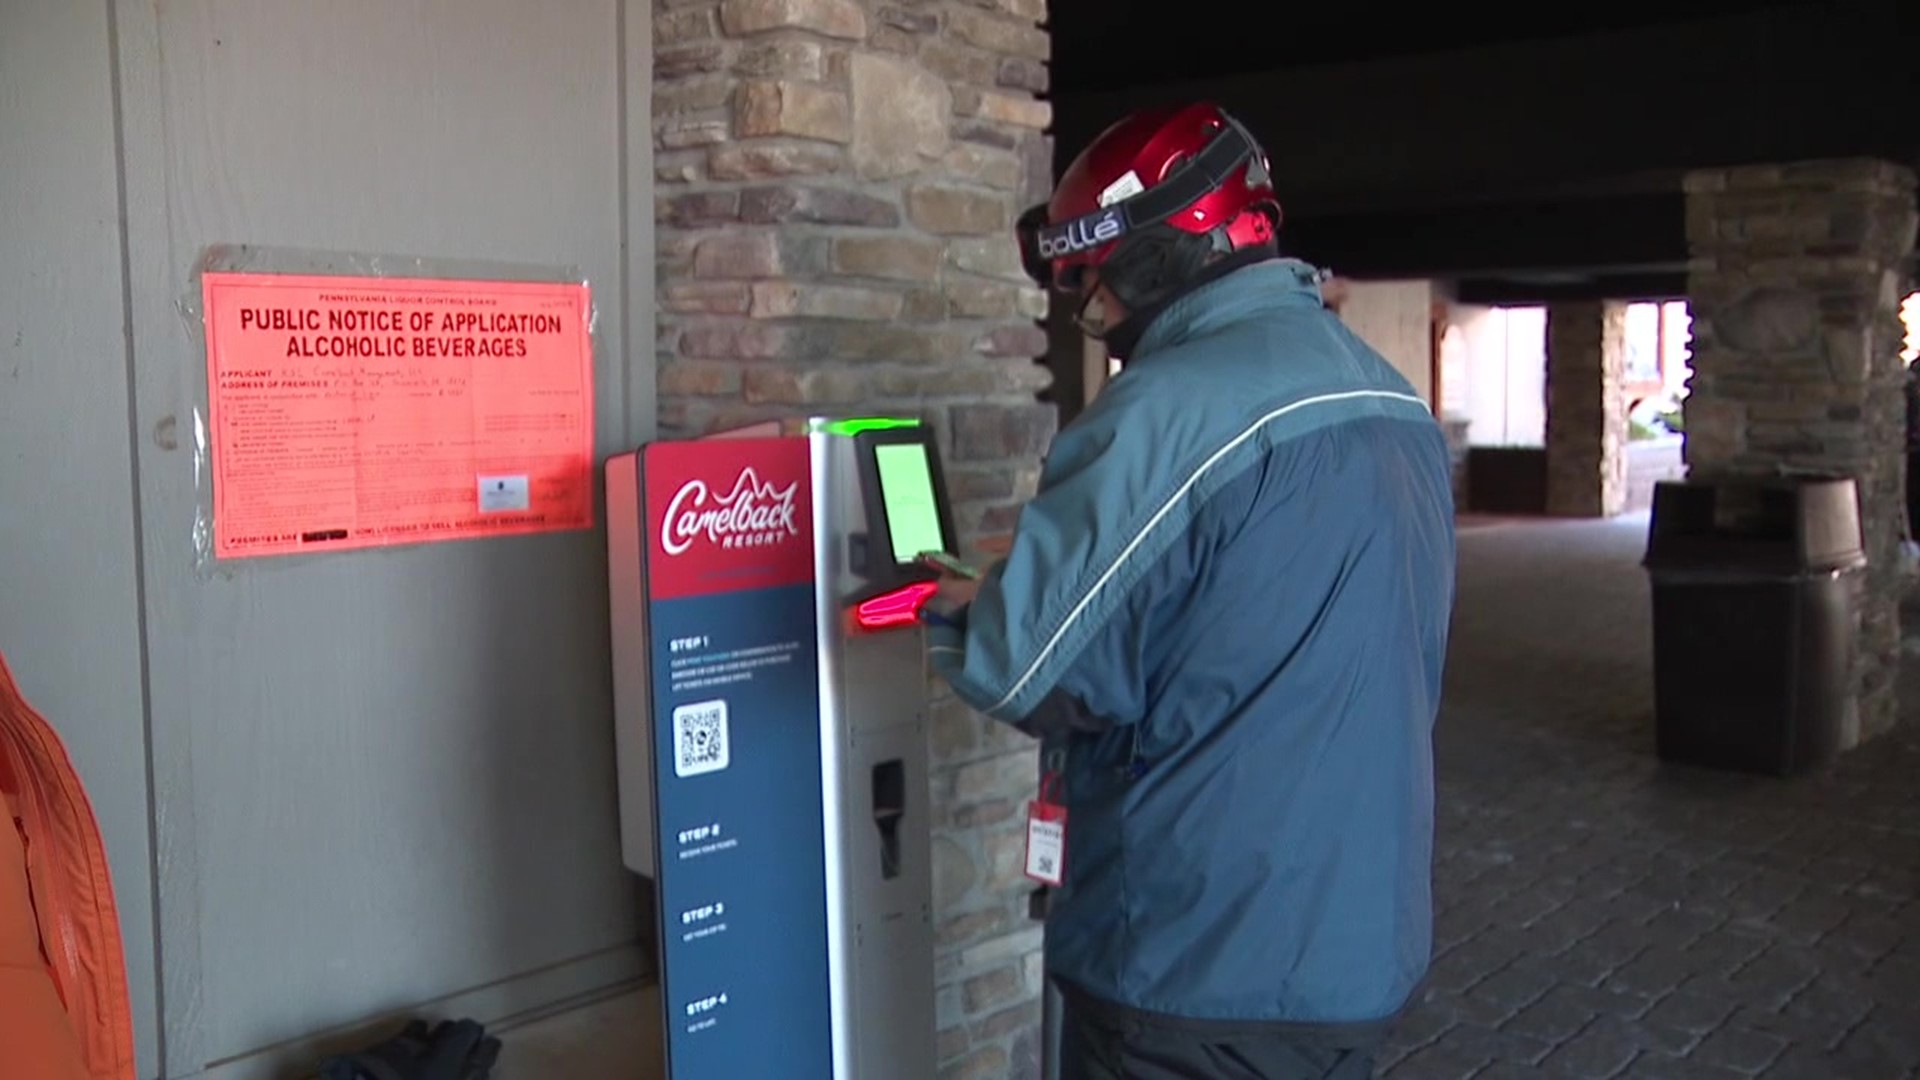 Camelback Resort near Tannersville recently installed several kiosks to allow for a quicker and COVID-friendly entry into the resort.